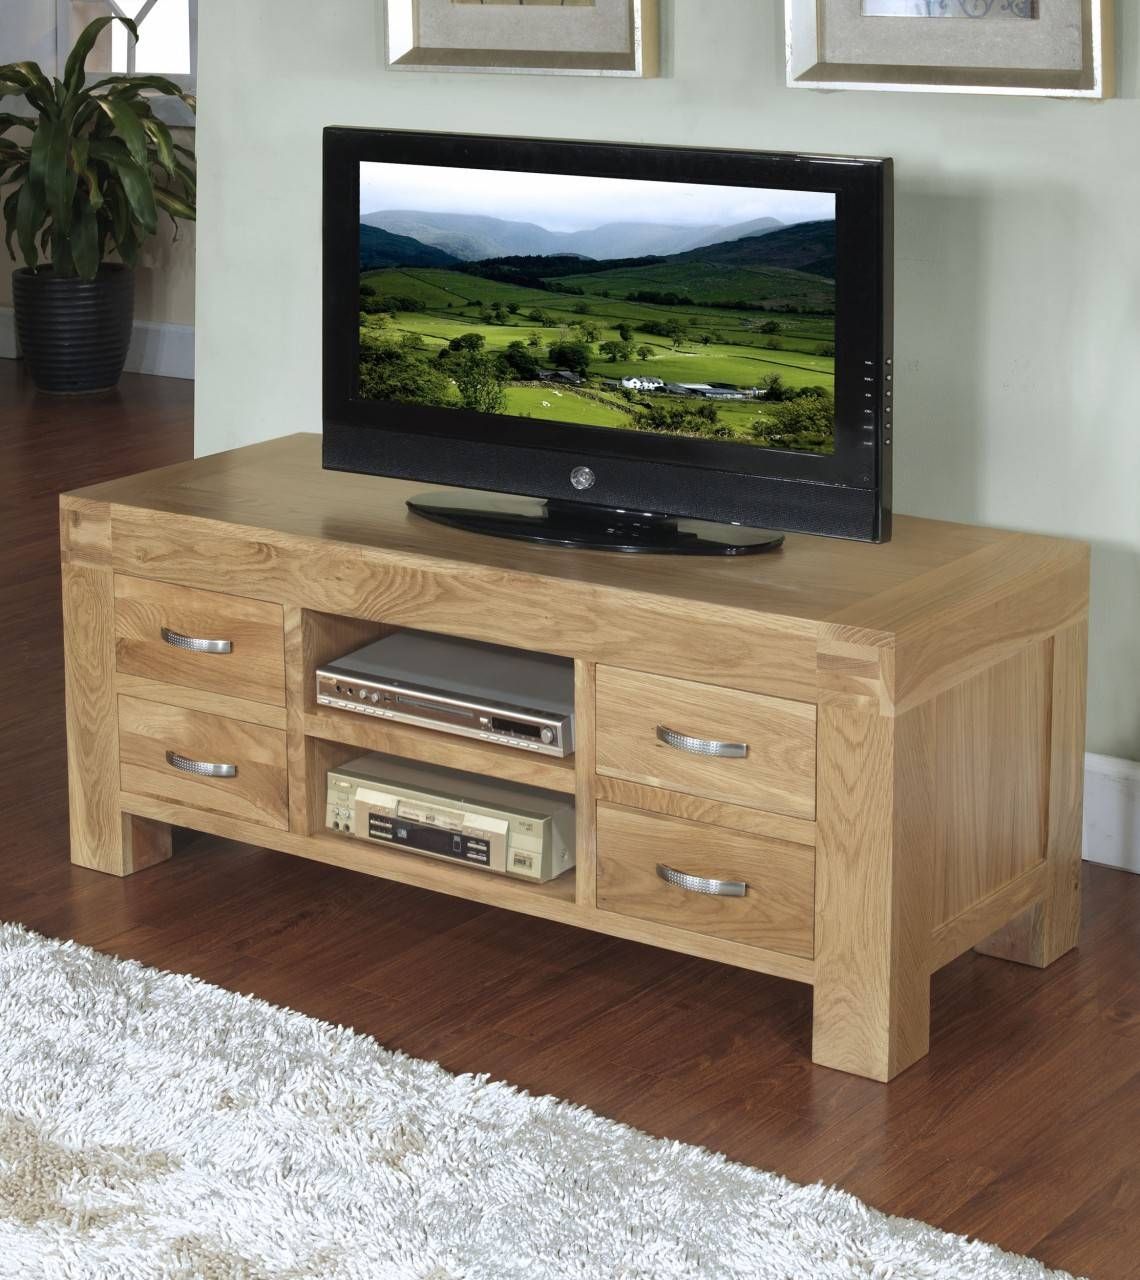 Oak Tv Stands Furniture The 25 Best Oak Tv Stands Ideas On Throughout Oak Tv Cabinets For Flat Screens (View 10 of 15)